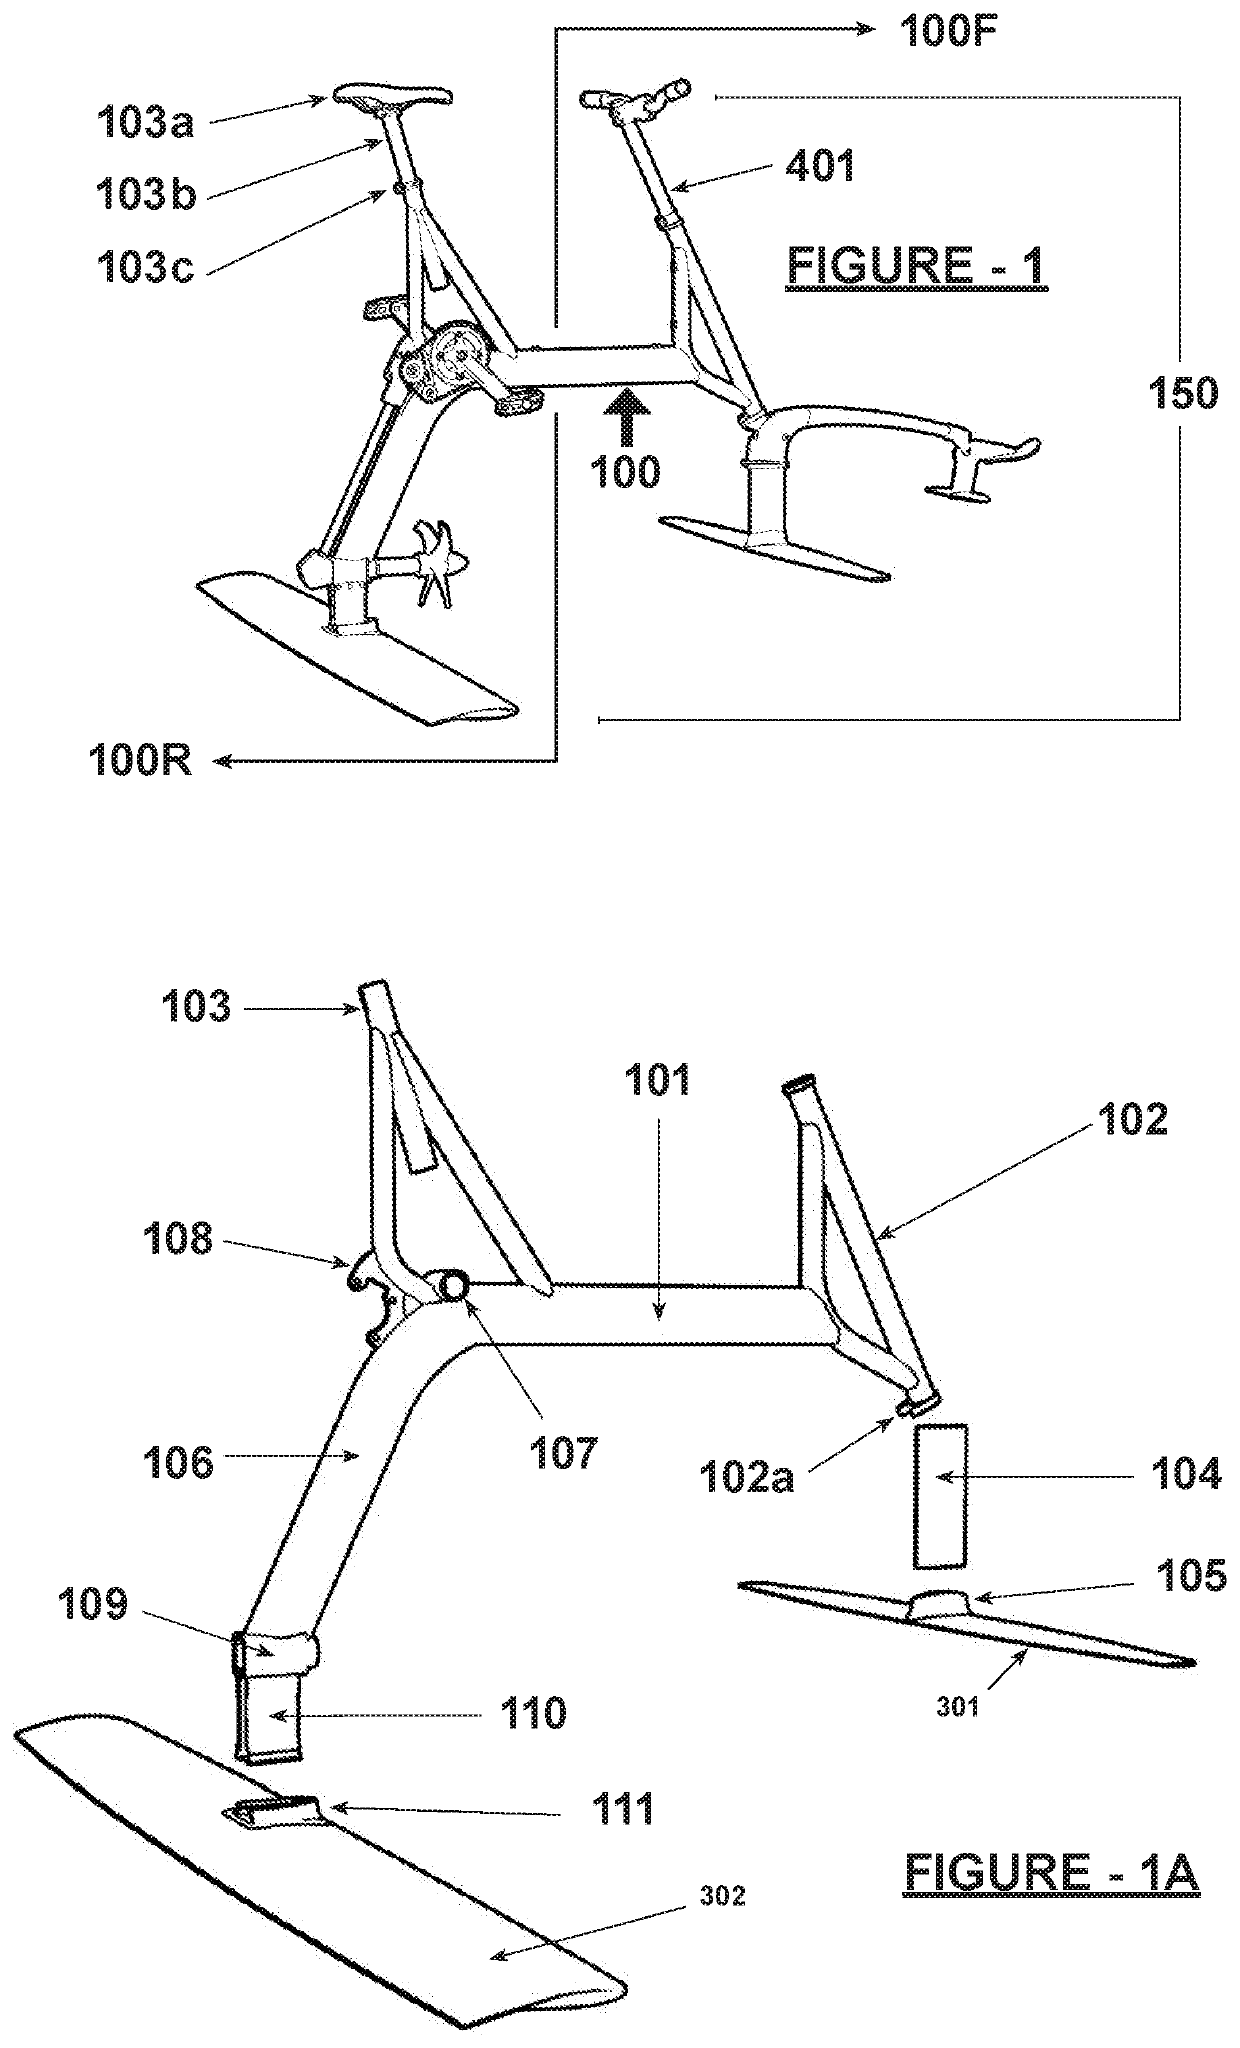 Human powered hydrofoil vehicle and use method